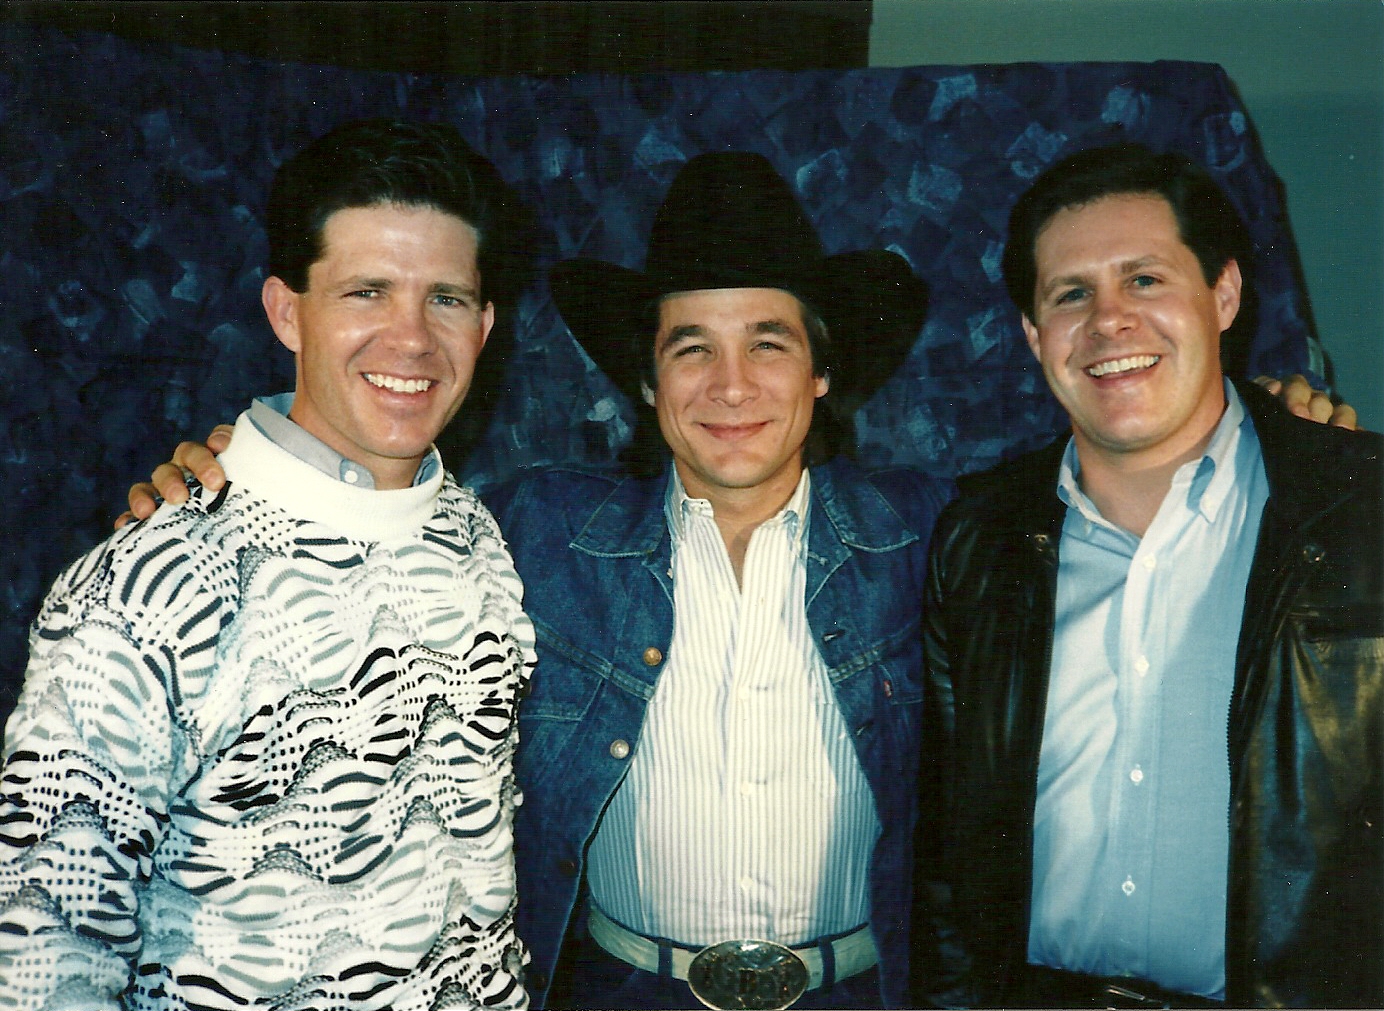 The McCain Brothers with Clint Black after an interview for Good Morning Oklahoma.